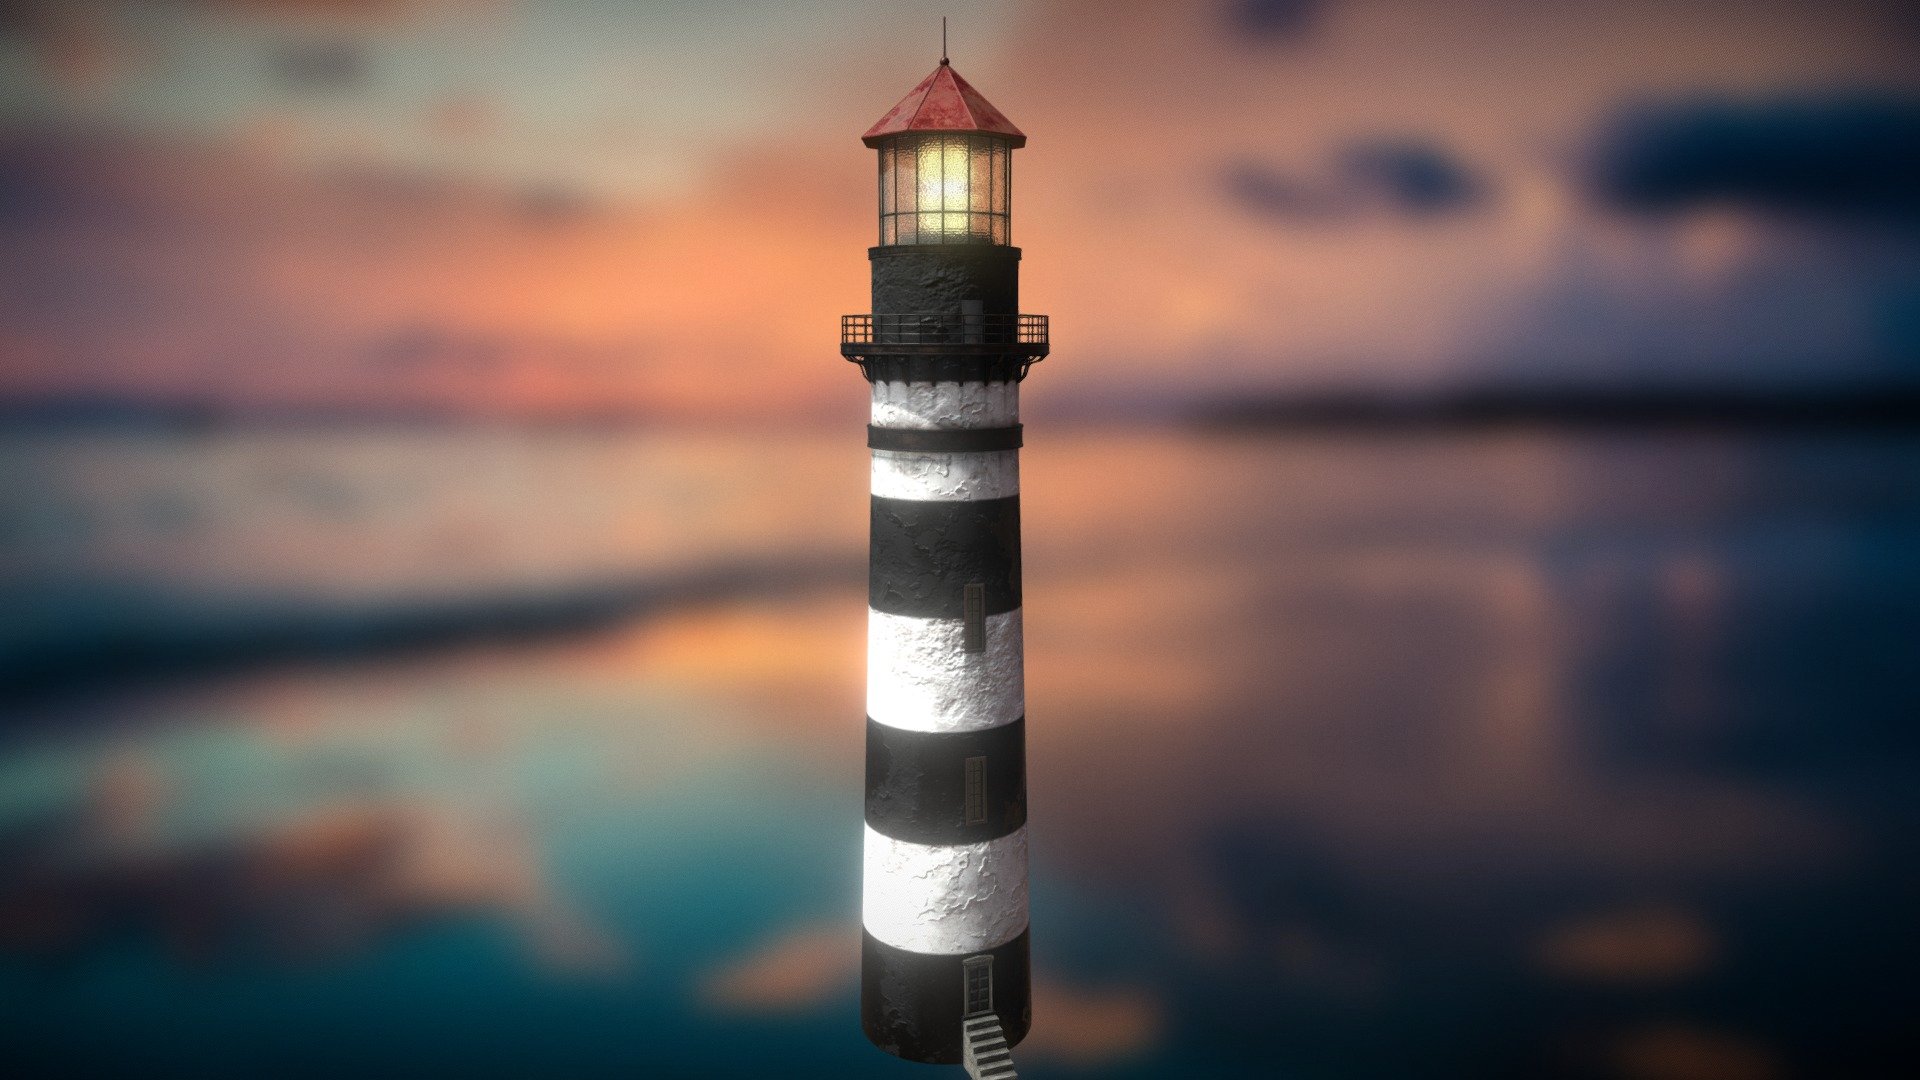 This is a model I designed of an old black and white lighthouse I created with an aluminum red roof. I created this using Blender, Substance Painter, Substance Designer and Photoshop. I love the ocean and this was my homage to the frontier of the sea. It is very detailed and took many hours to paint and model. I wanted to capture the essence of some old lighthouses I've seen over the years. I didn't want to replicate any exact one, but rather make my own interpretation. I hope you enjoy! Now available for purchase here on Sketchfab! - Old Black & White Lighthouse - Buy Royalty Free 3D model by Gregory Allen Brown (@gregoryallenbrown) 3d model